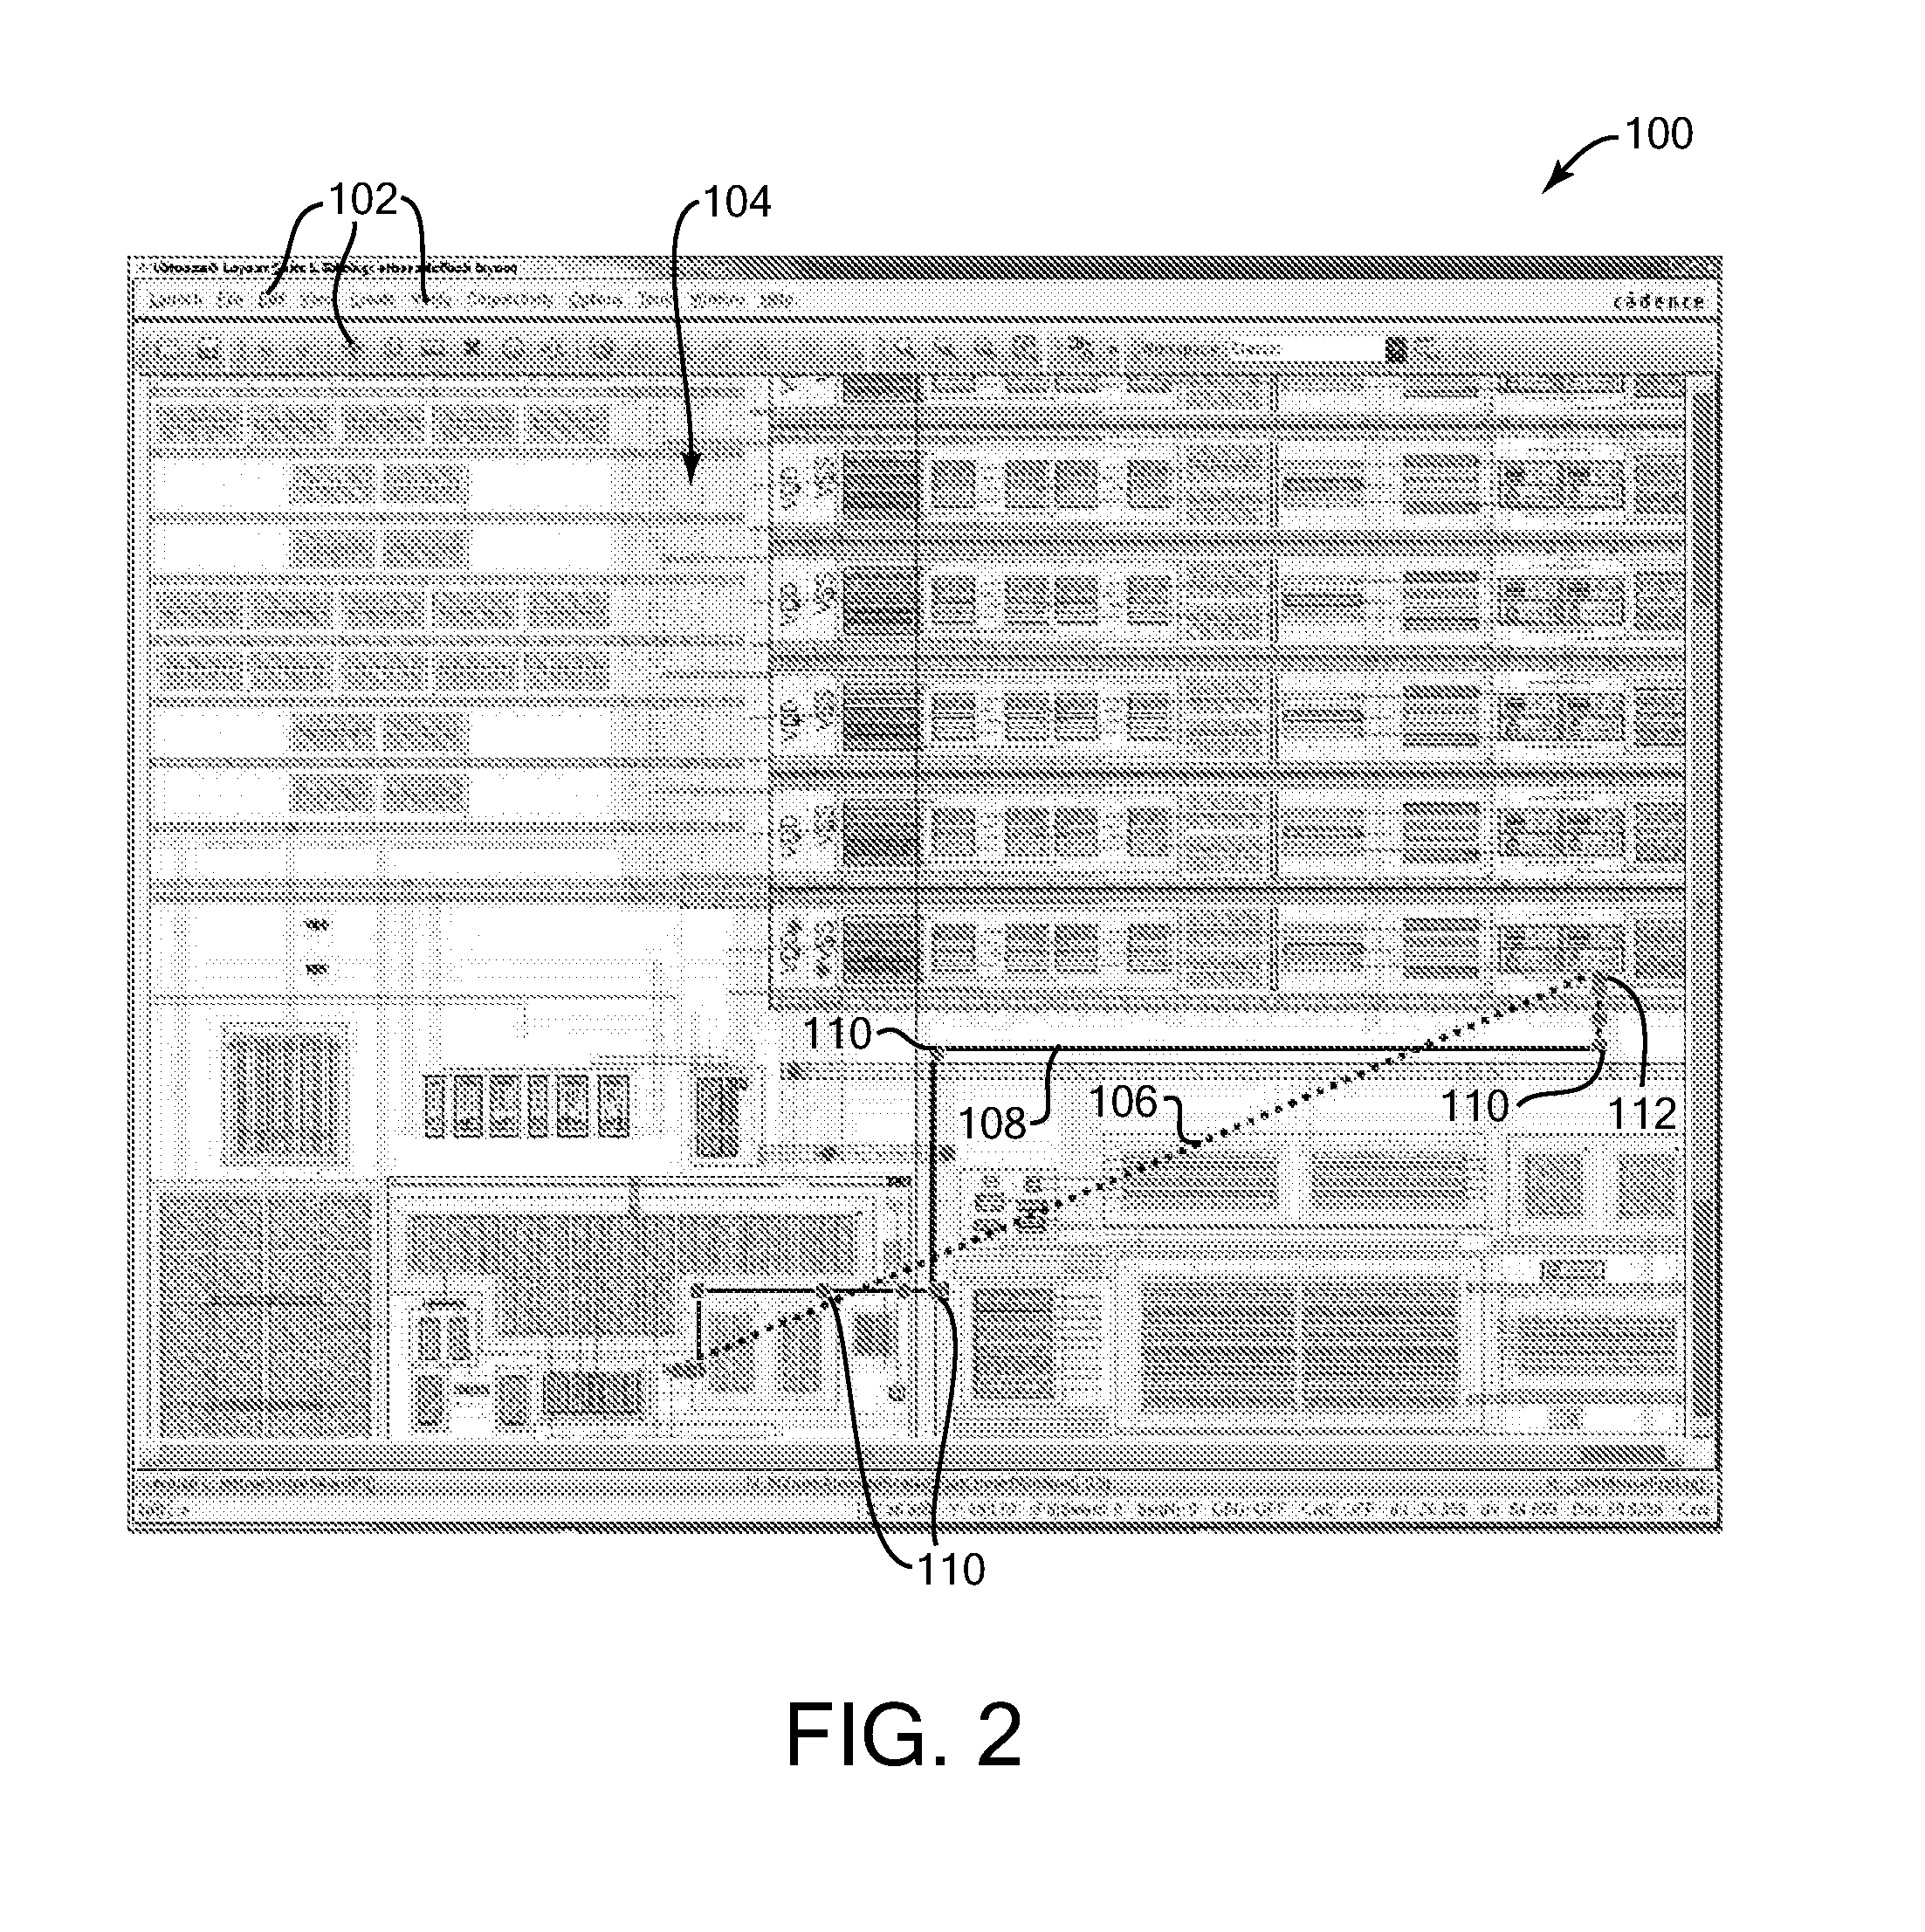 Method and system for viewing and editing an image in a magnified view